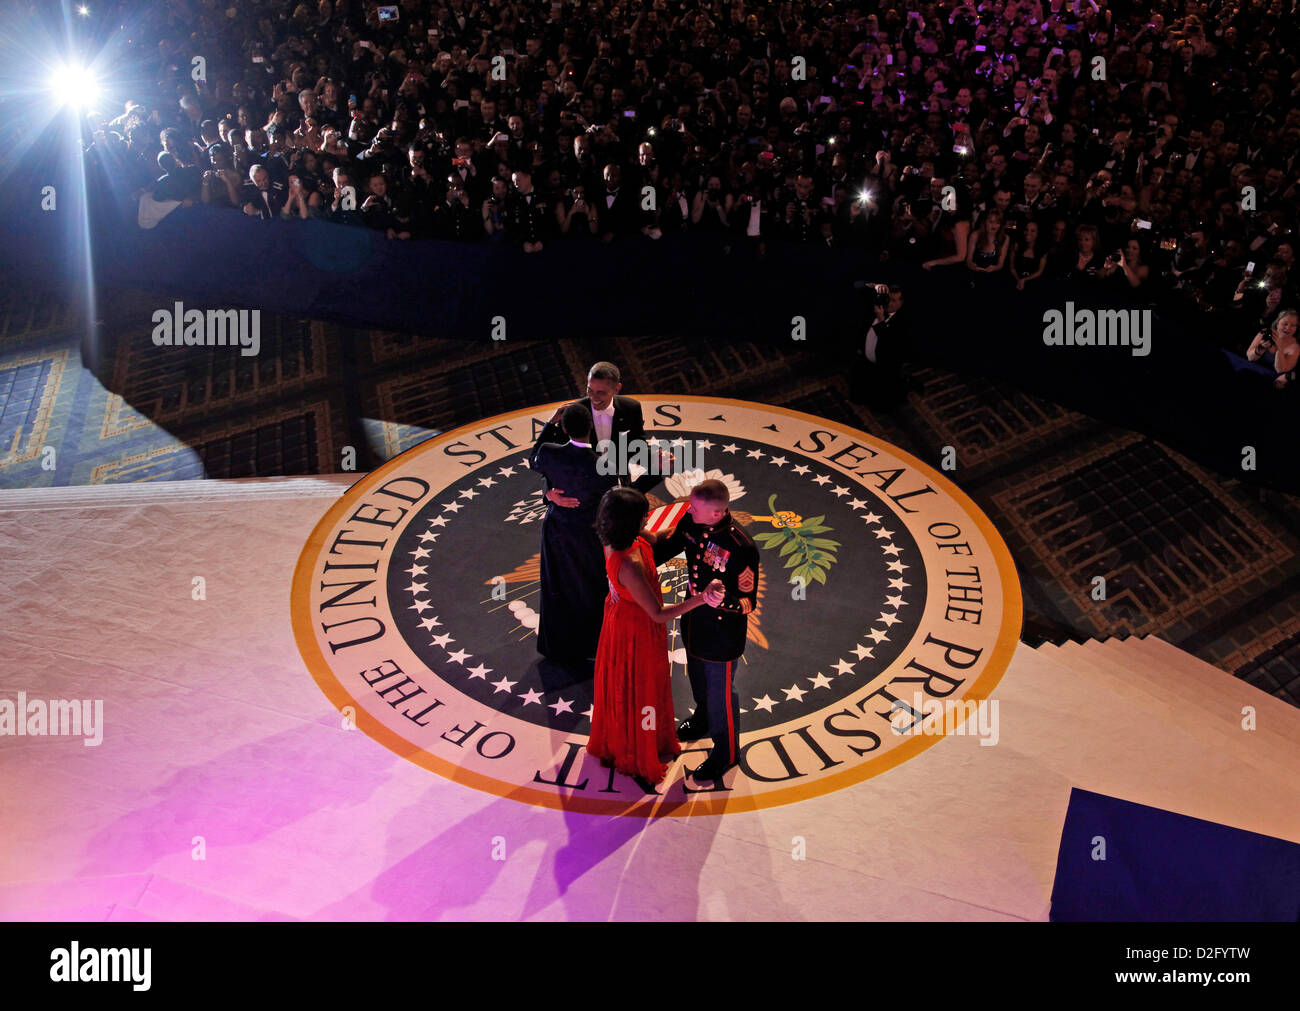 Washington DC, USA. 21st January 2013. United States President Barack Obama dances with Staff Sergeant Bria D. Nelson of the Air Force as first lady Michelle Obama dances with Gunnery Sergeant Timothy D. Easterling of the Marine Corps at the Commander-in-Chief's Inaugural Ball in Washington, at the Washington Convention Center during the 57th Presidential Inauguration Monday, Jan. 21, 2013. .Credit: Pablo Martinez Monsivais / Pool via CNP Stock Photo